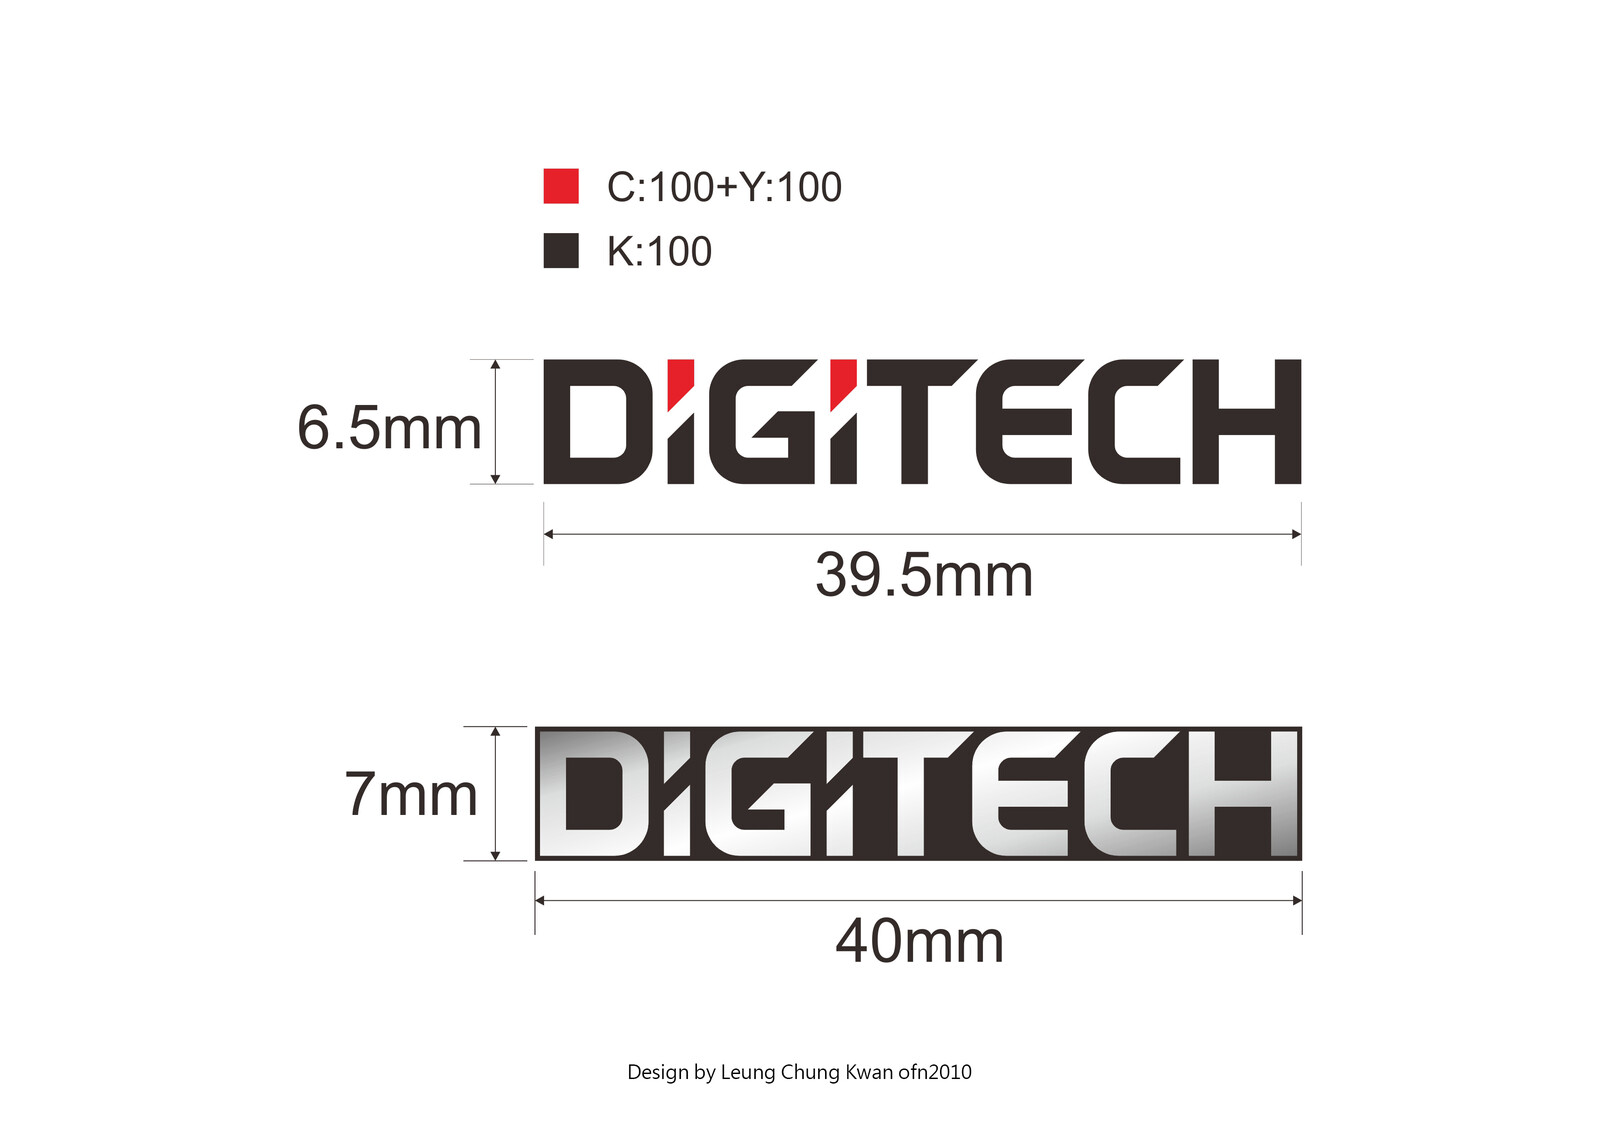 💎 Logo | Design by Leung Chung Kwan on 2010 💎
Brand Name︰DIGITECH | Client︰OTIC Limited
http://bit.ly/ot1444-logo